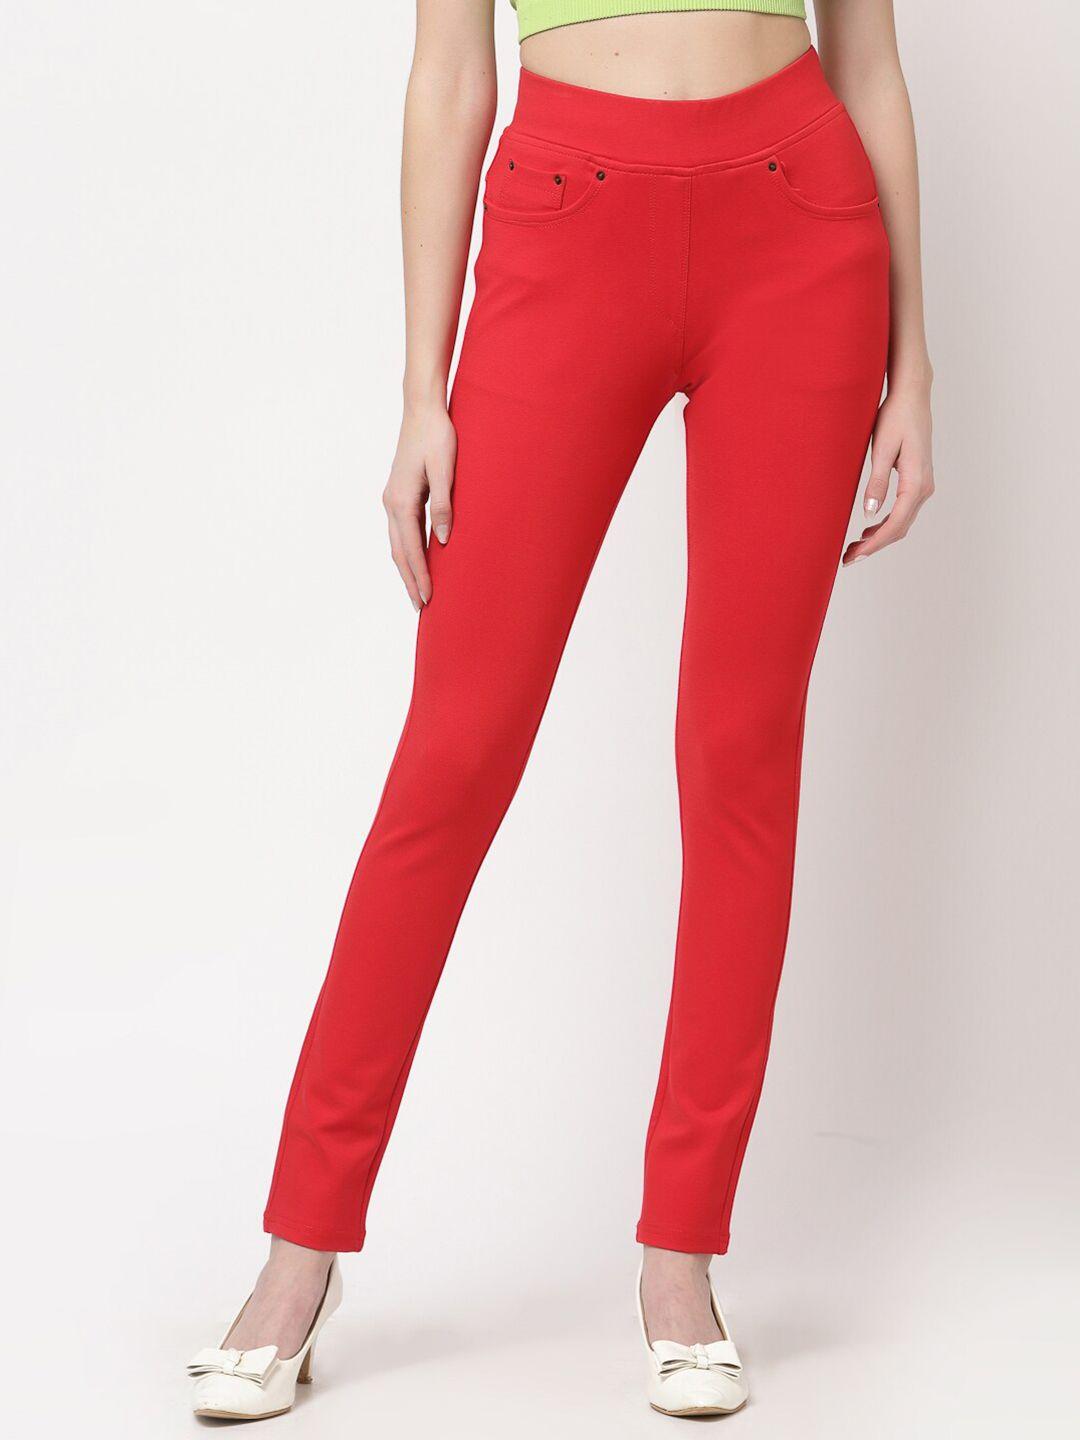 westwood women red solid cotton skinny-fit jegging